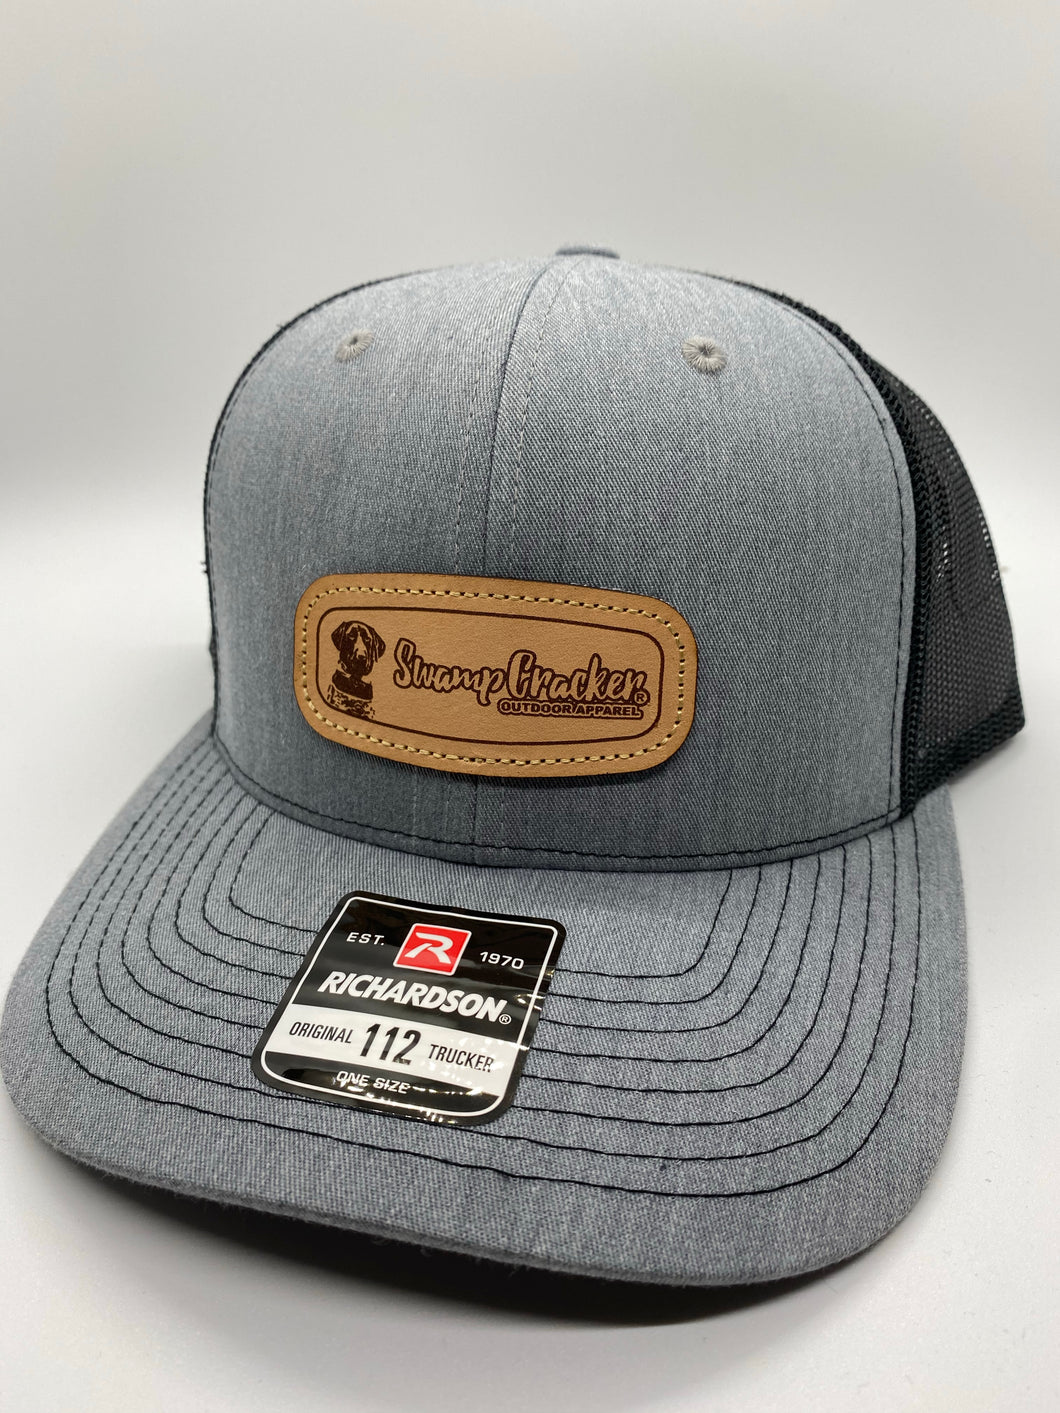 Swamp Cracker Duck hunting lab leather patch SnapBack hat